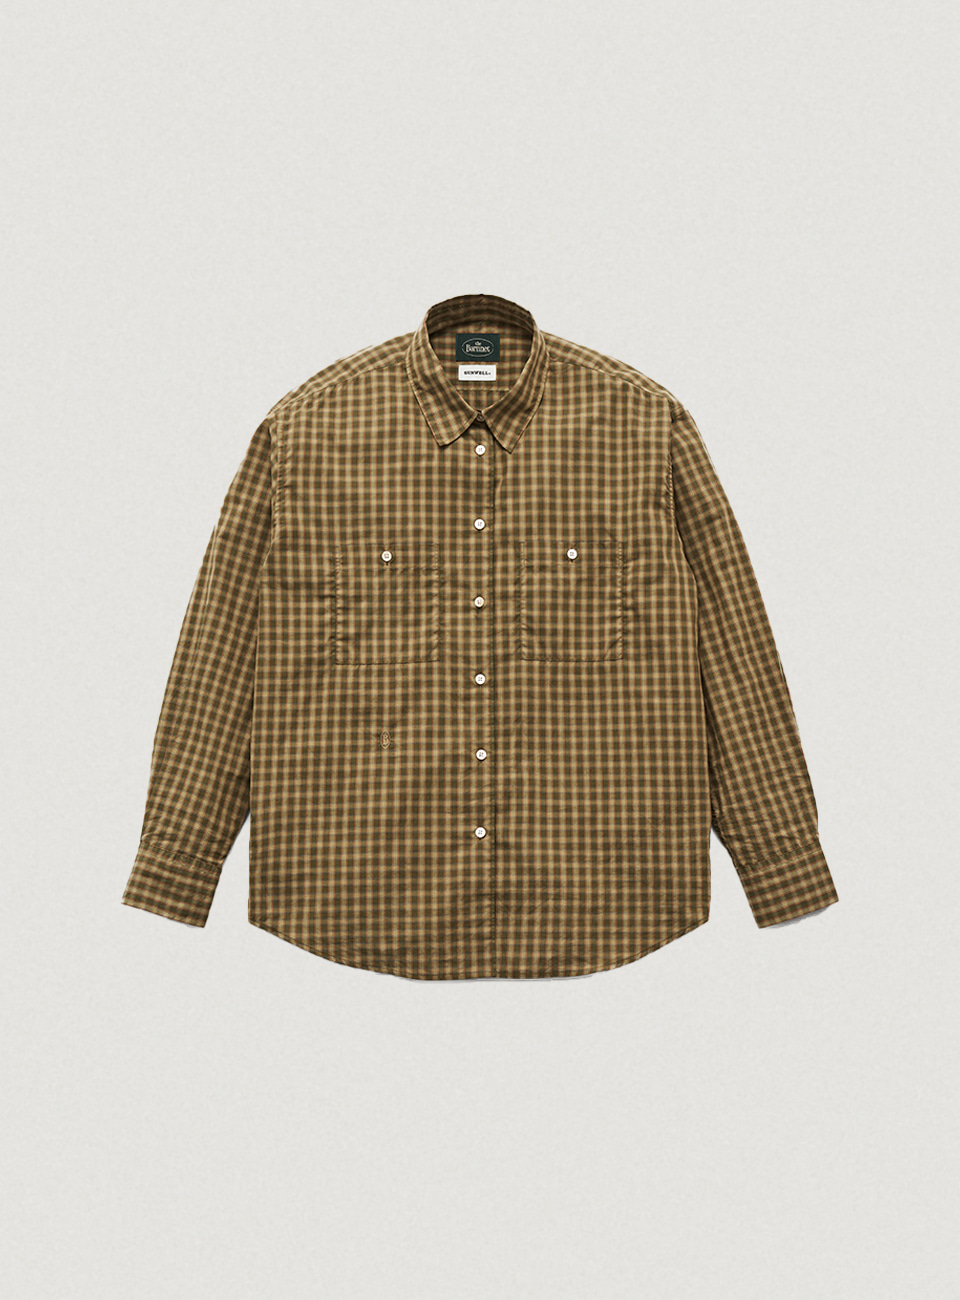 Olive Check Shirt by SUNWELL